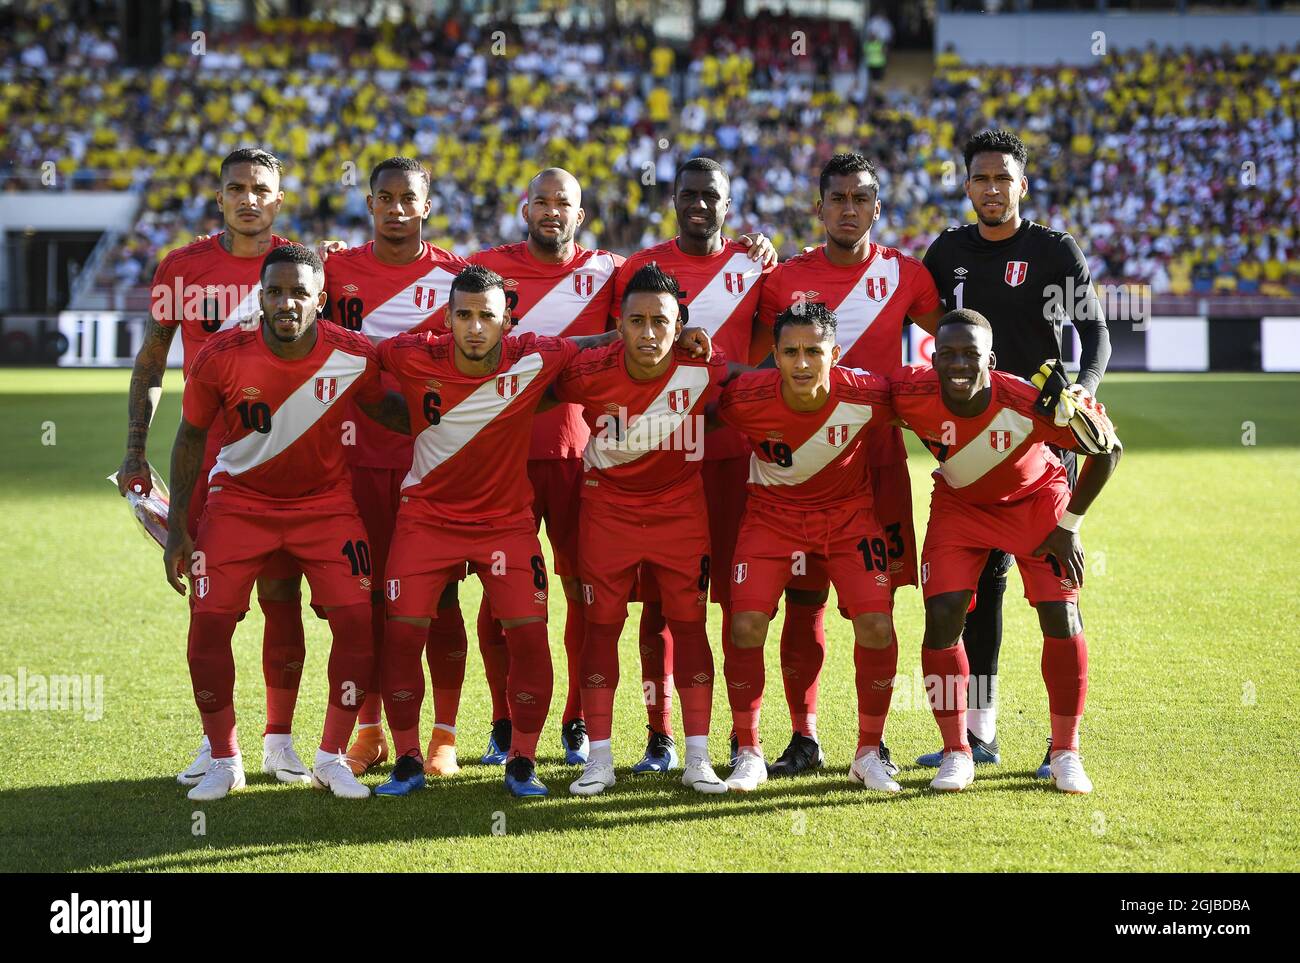 ADDING PLAYERS NAMES Peruvian players pose for a team picture prior to the international friendly soccer match between Sweden and Peru at Ullevi staduium i Gothenburg, Sweden, on June 9, 2018. Back row L-R: Paolo Guerrero, AndrÃ© Carrillo, Albert Rodriguez, Christian Ramos, Renato Tapia och Pedro Gallese. Front row L-R: Jefferson Farfan, Miguel Trauco, Christian Cueva, Yoshimar Yotun och Luis Advincula . Photo: Pontus Lundahl / TT / code 10050  Stock Photo